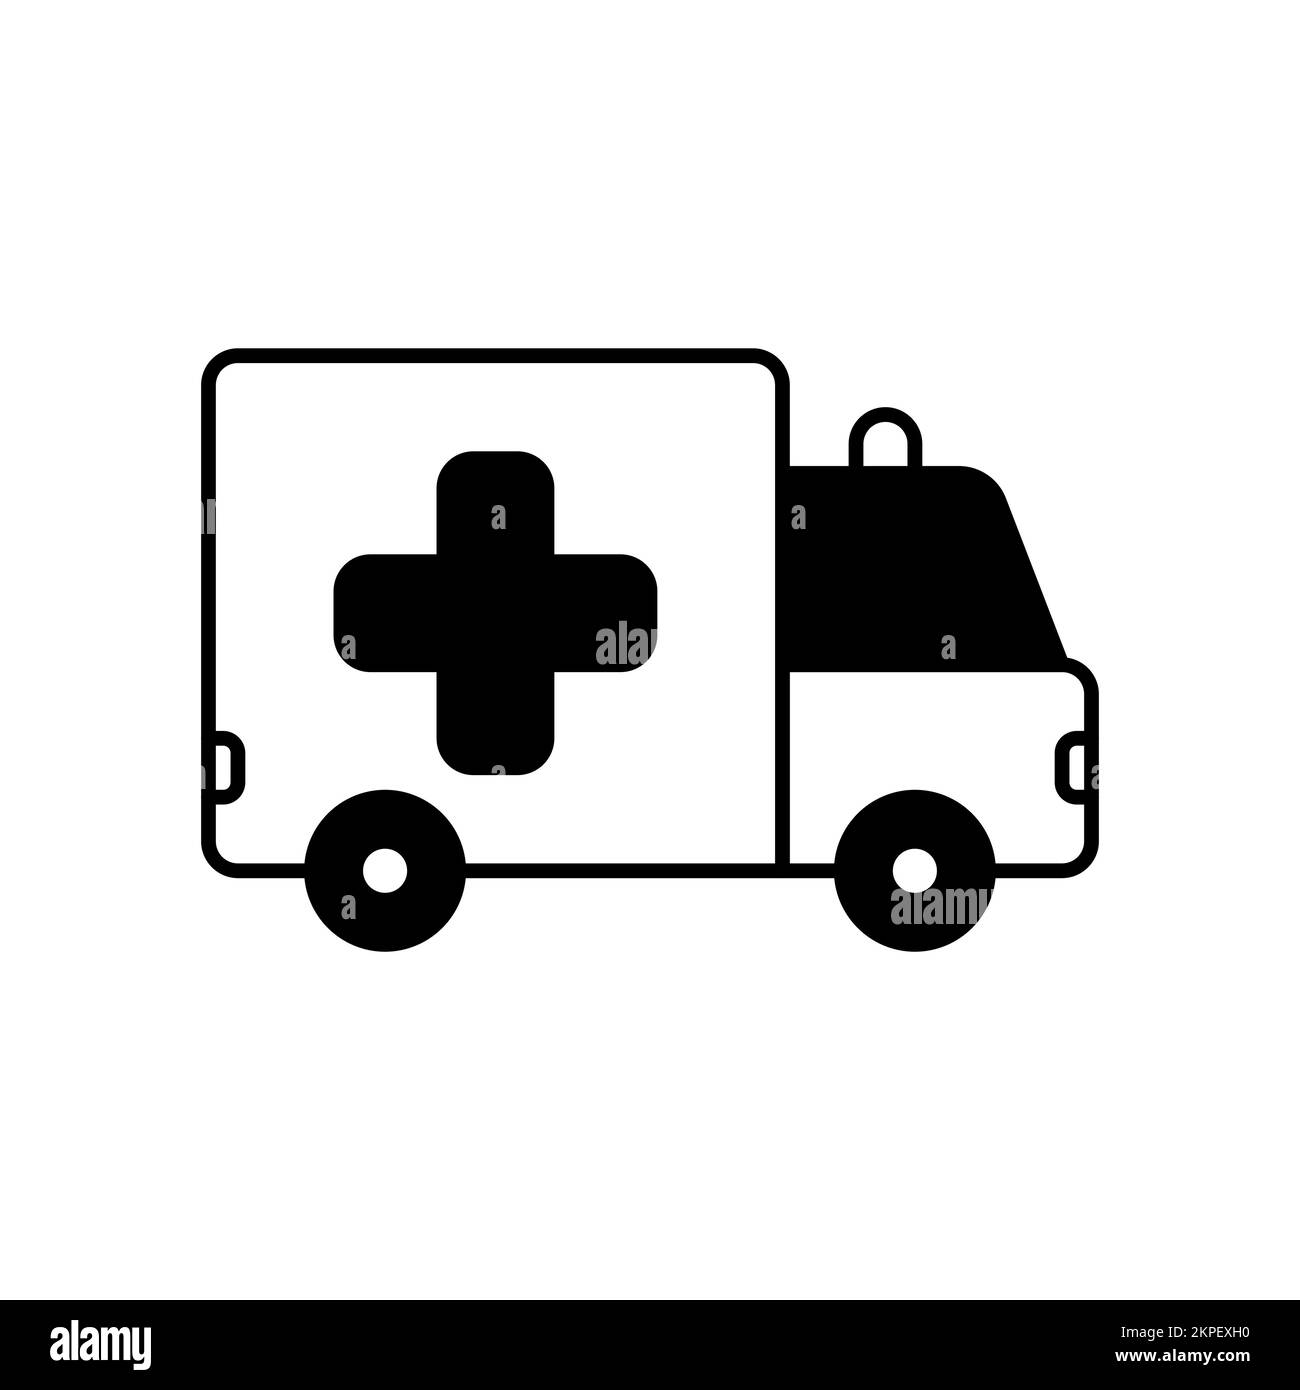 Ambulance Car Icon, Deal With Emergencies With an Ambulance. Stock Vector